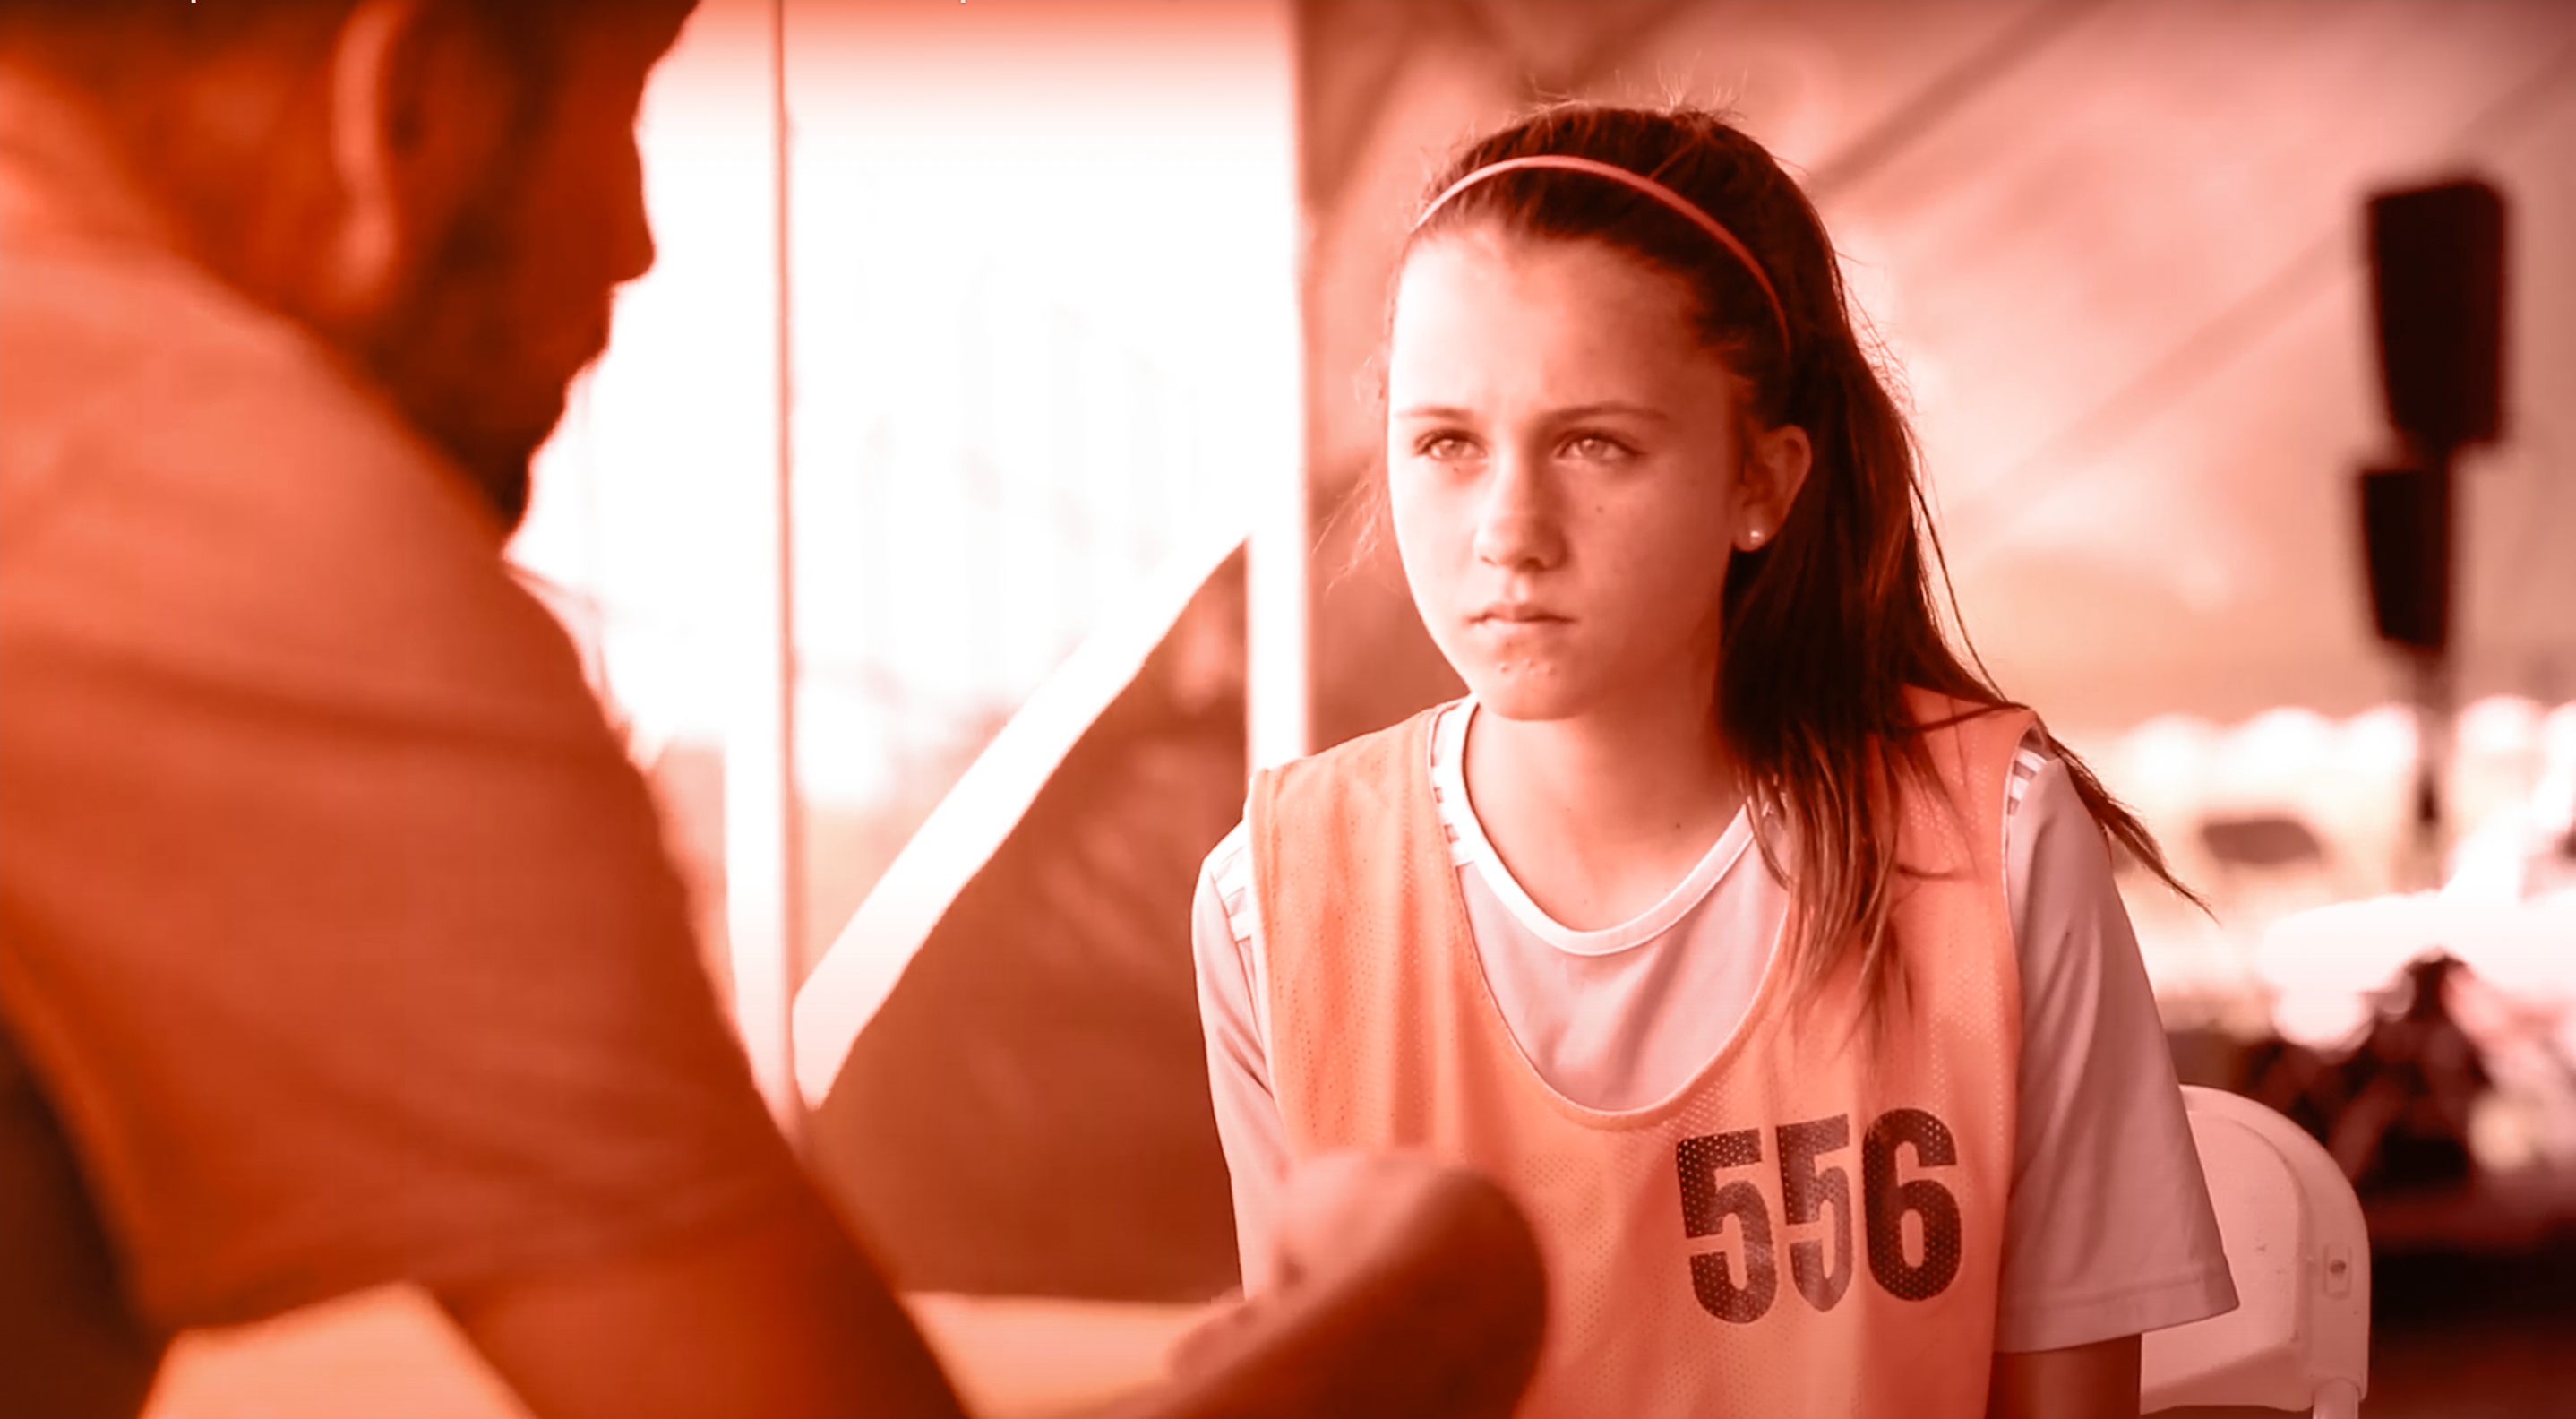 A Young Soccer Athlete Receives A One On One Evaluation At An EXACT College Showcase Camp